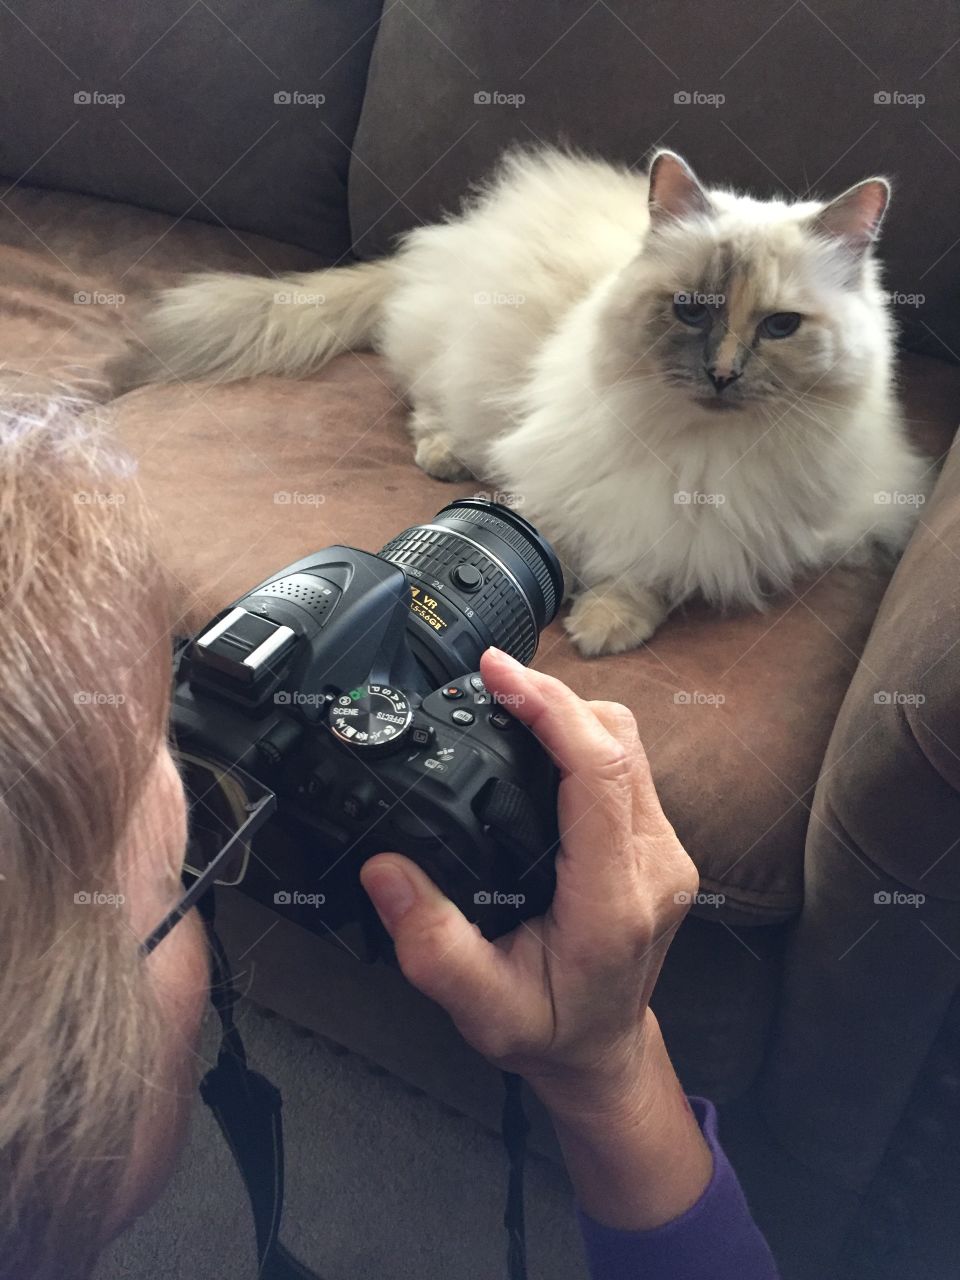 Taking picture of a cat